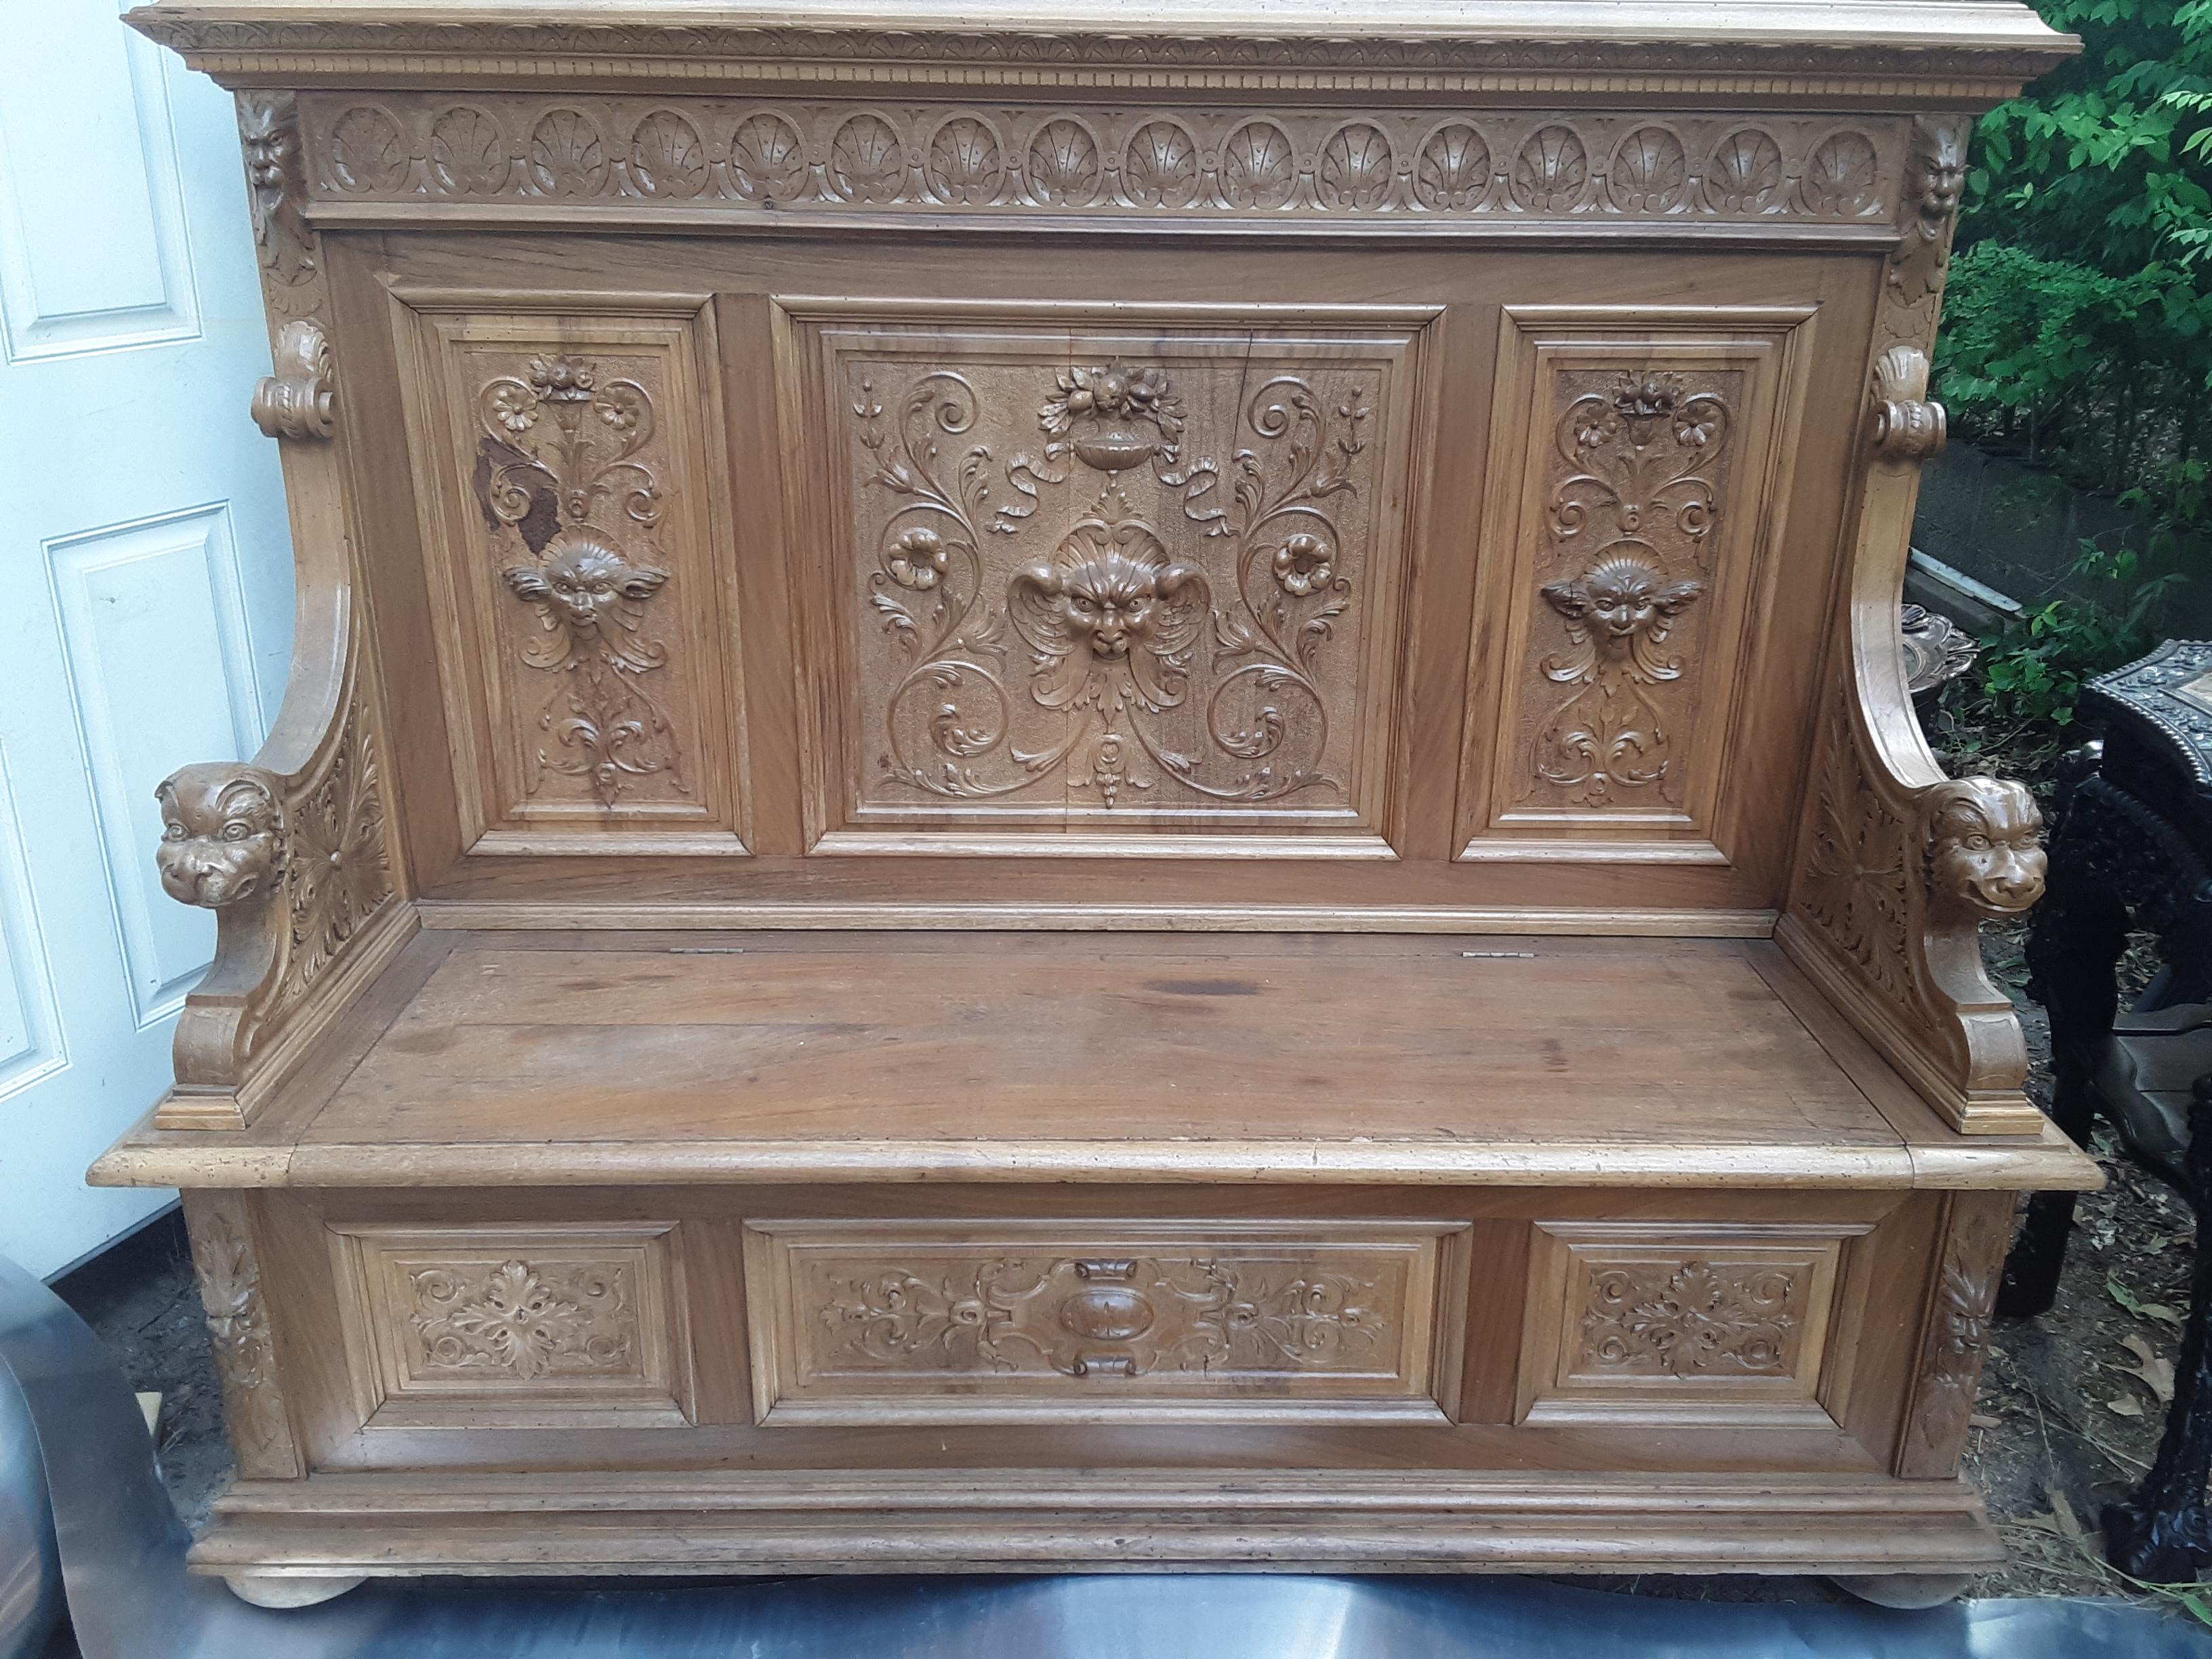 Antique Italian Renaissance style bench in heavy carved walnut, Ca 1860 Impressive 19th Century bench of solid walnut with heavily hand-carved Renaissance motif of dragons, lion heads, chalise & vines. The seat lid opens to reveal storage.